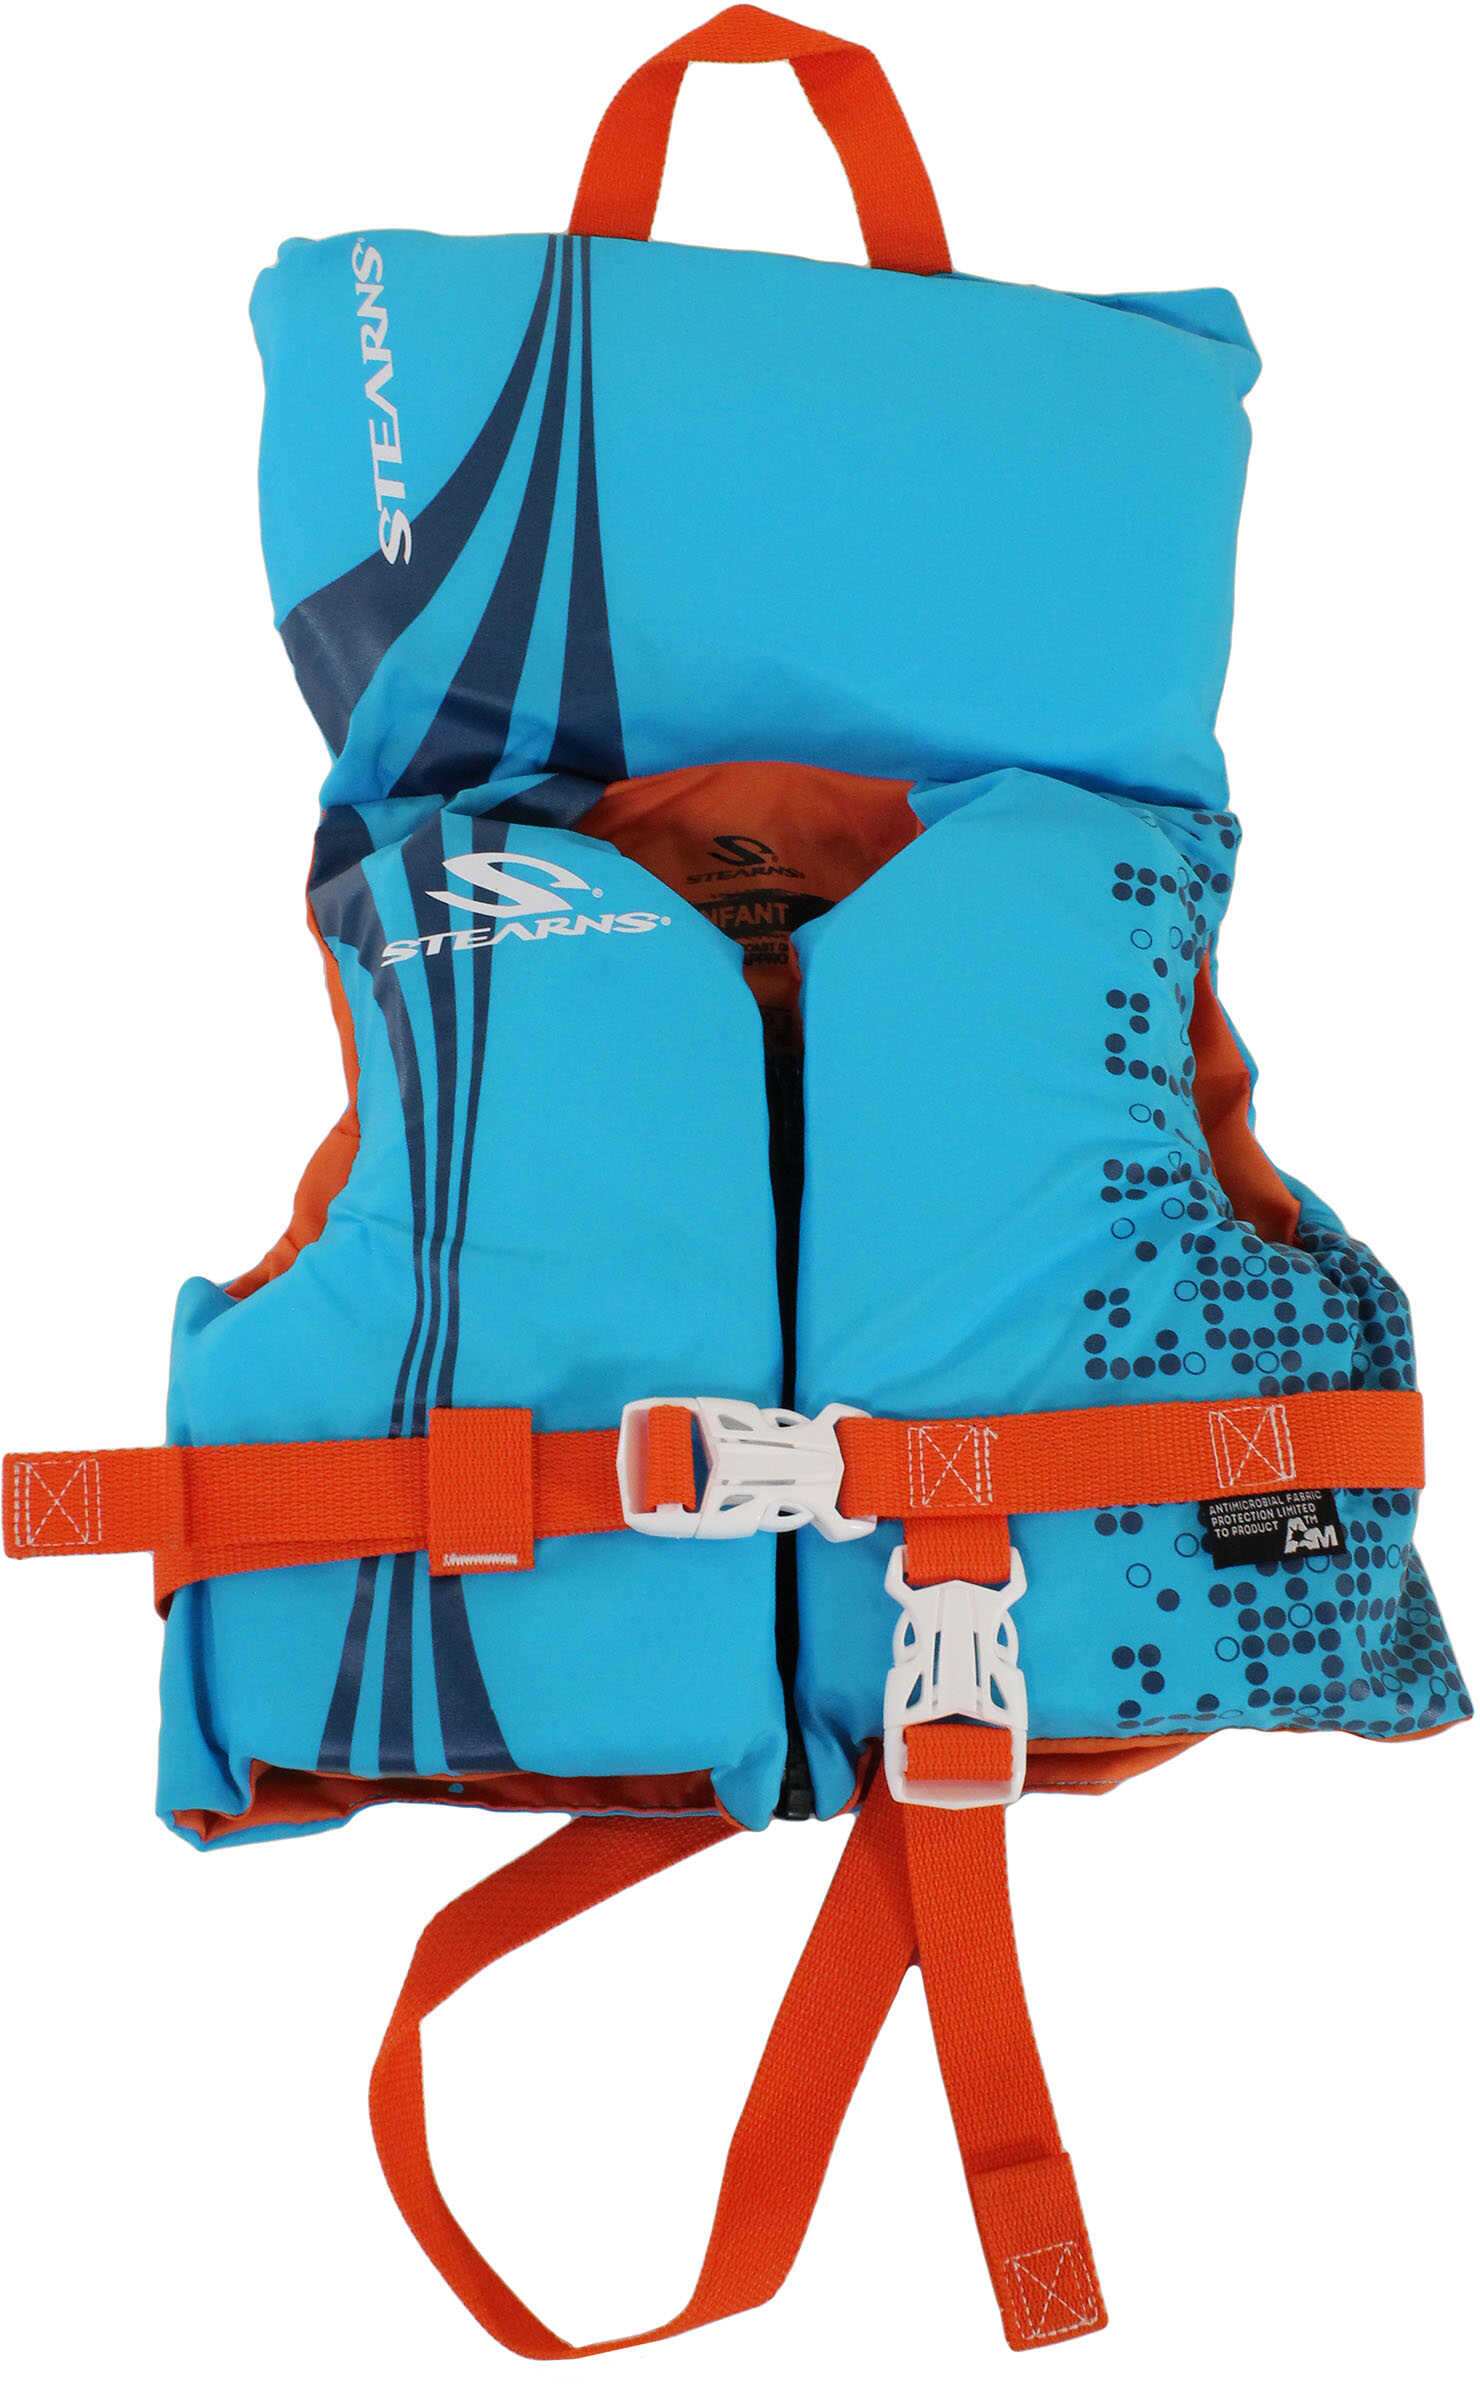 Stearns Puddle Jumper Deluxe Life Jacket Blue Md: 2000029260